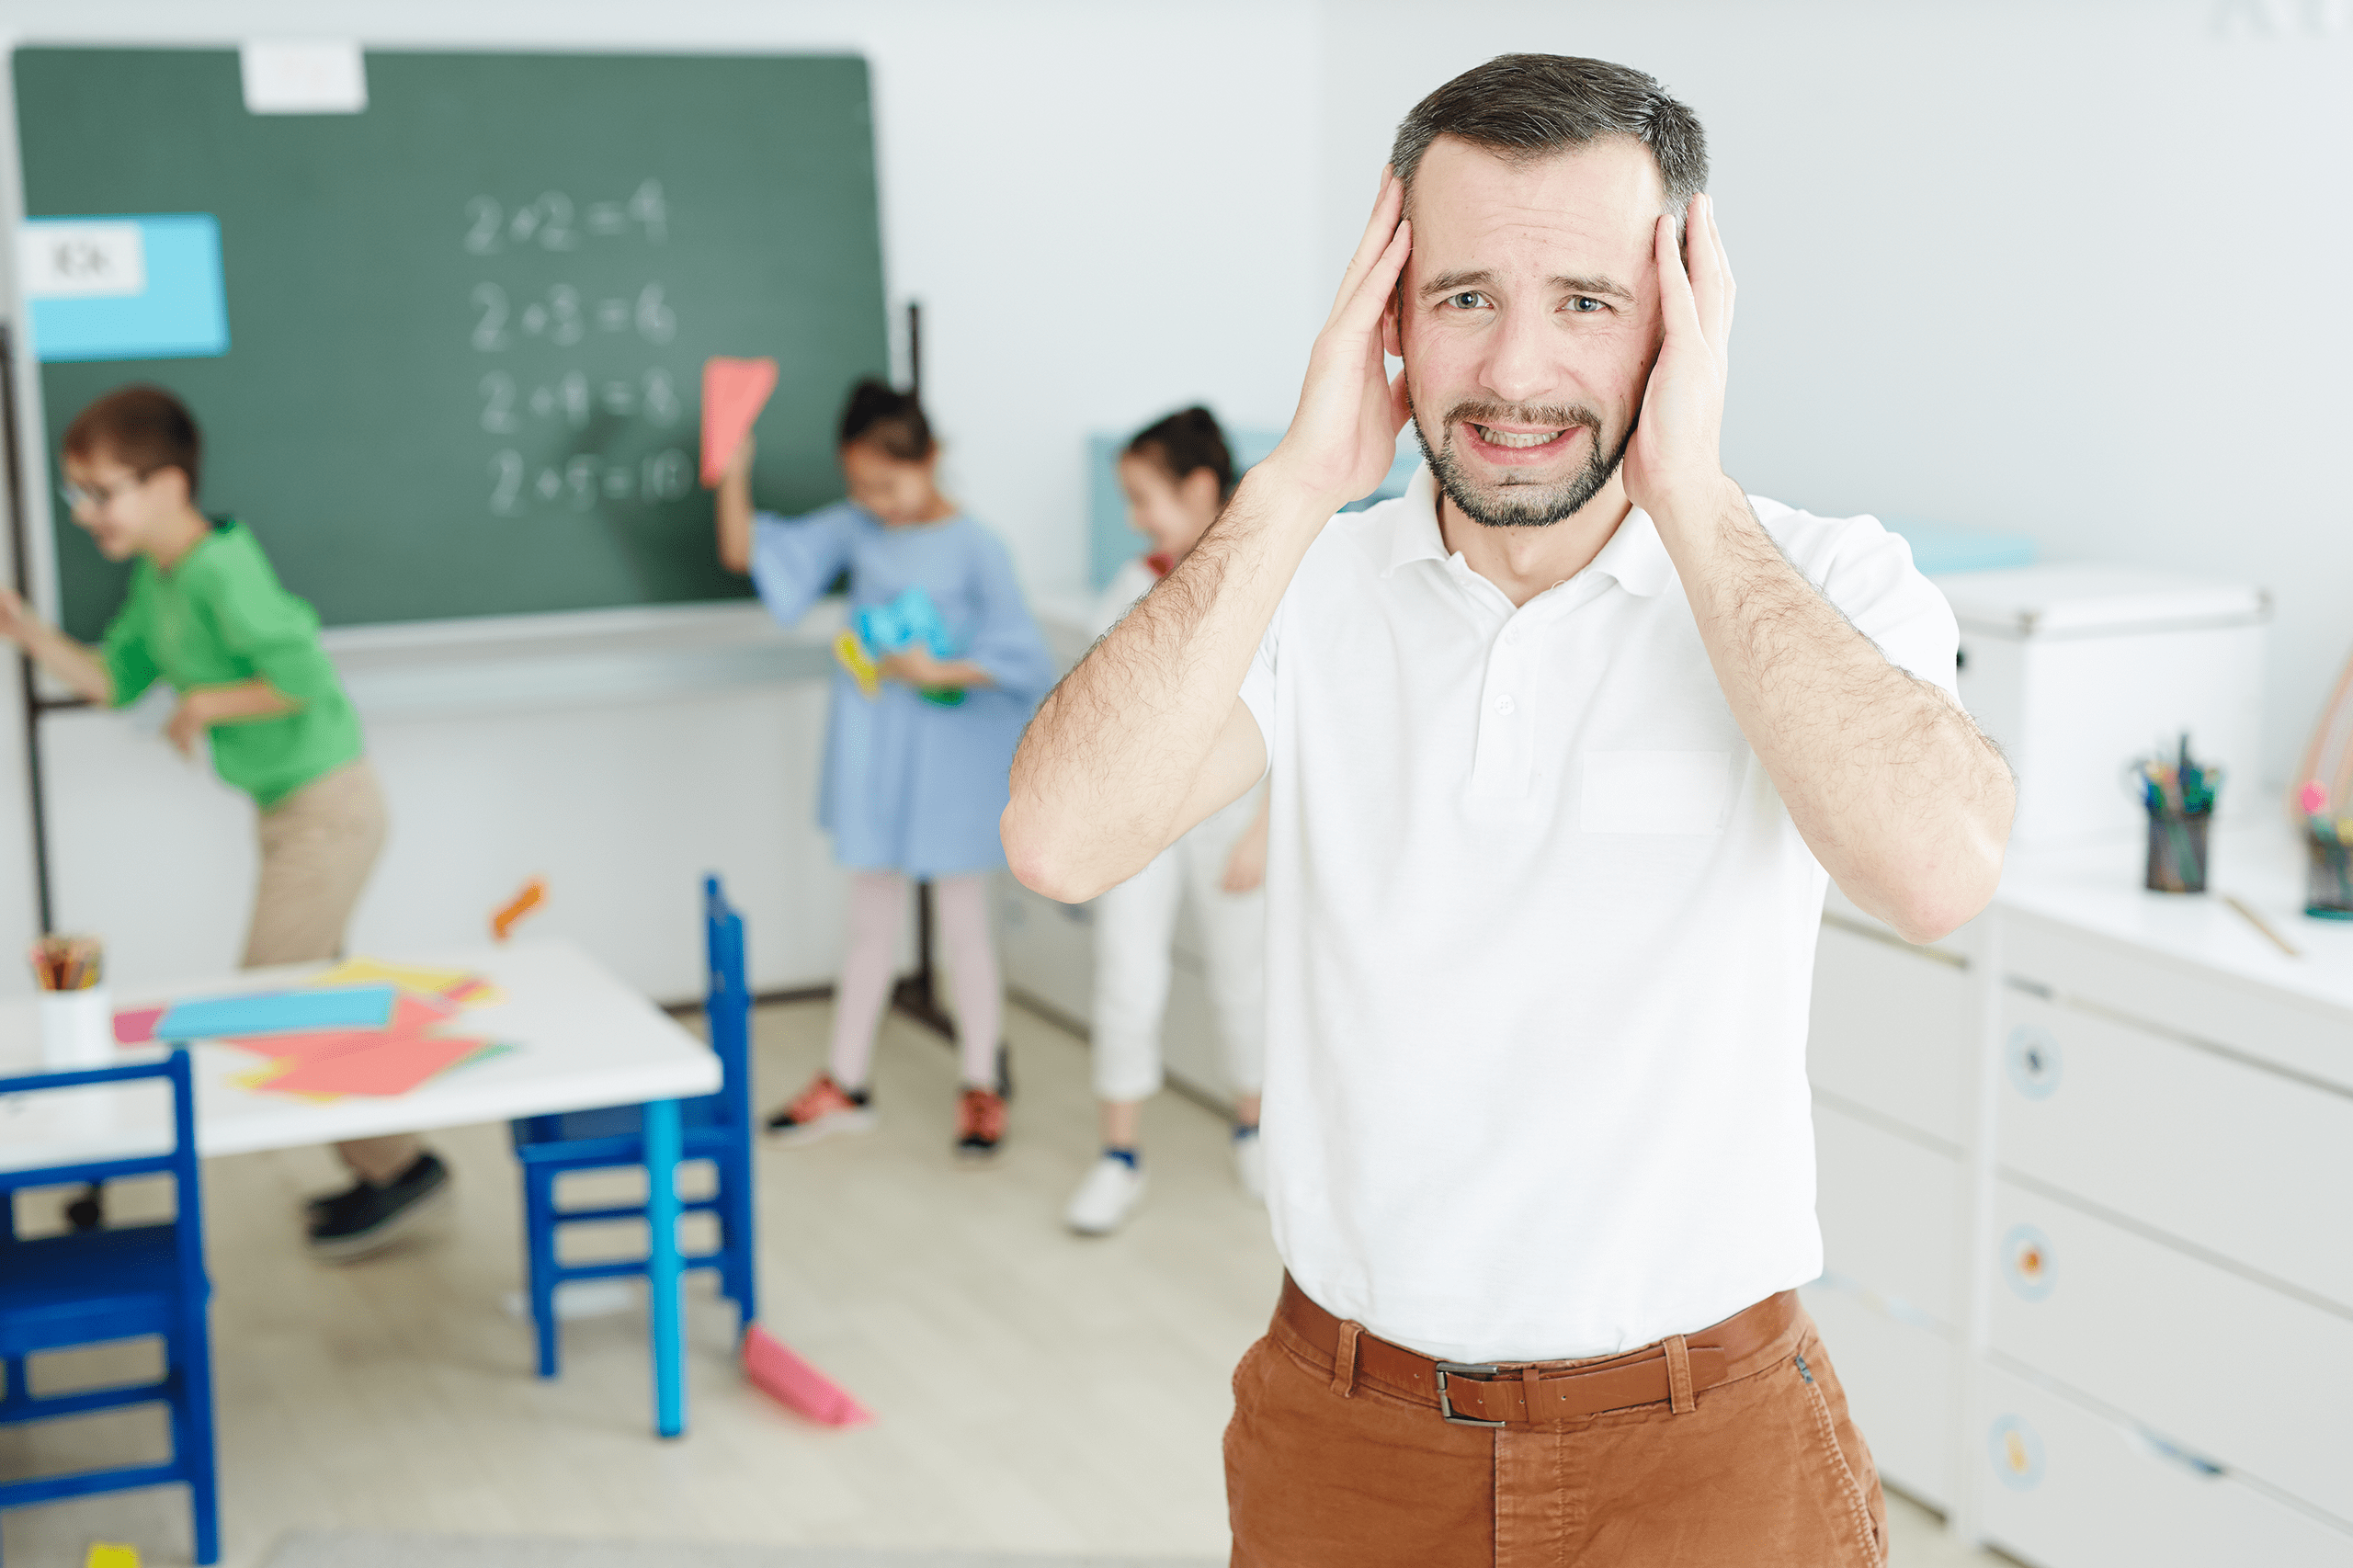 Frustrated male teacher looks worried while his students play with paper airplanes in the classroom.